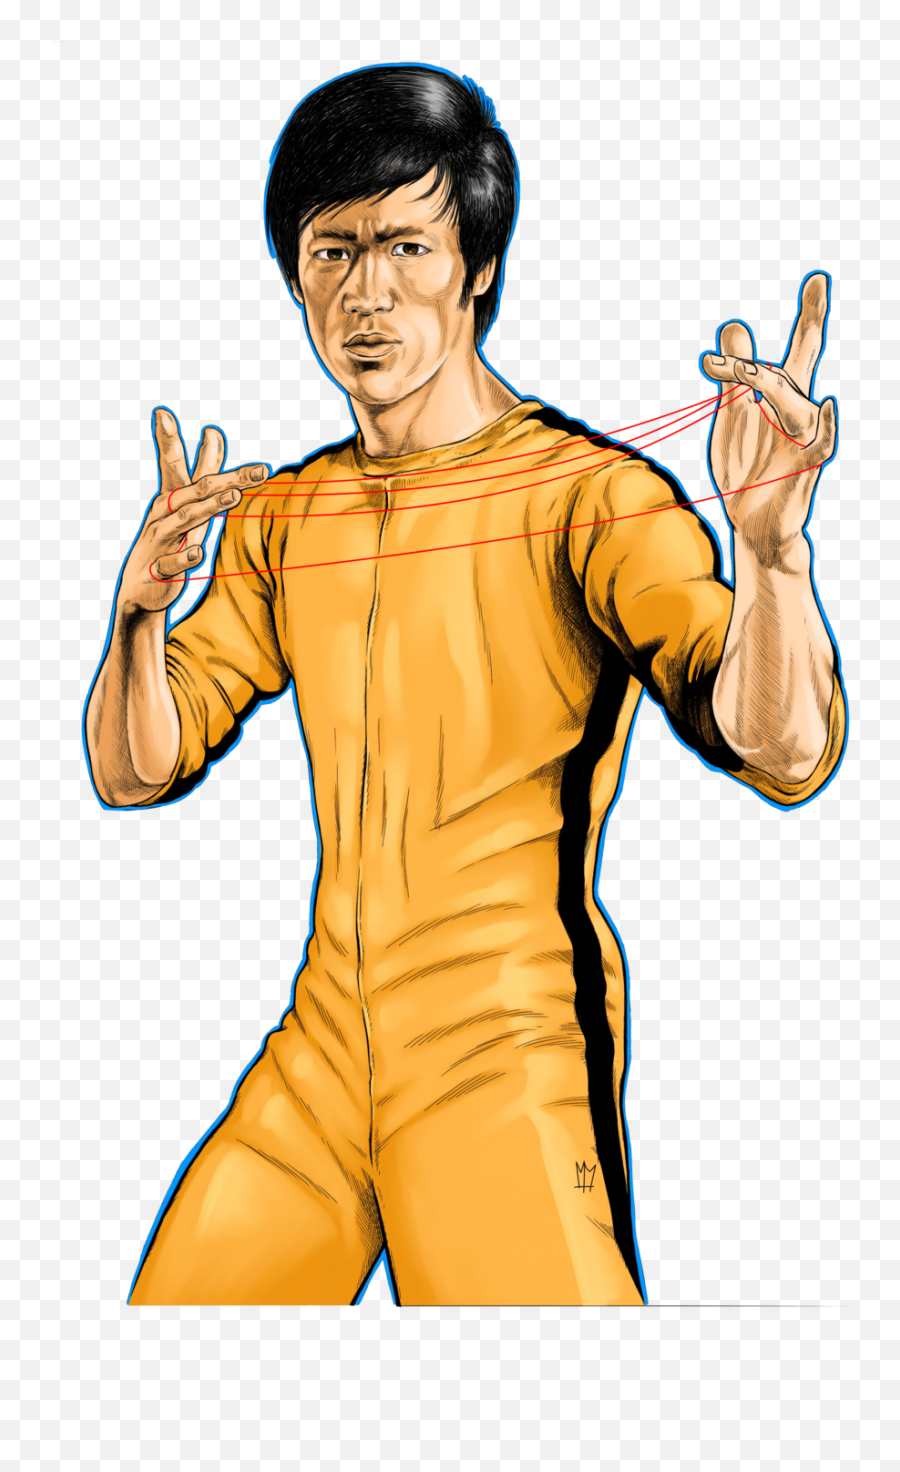 Bruce Lee Png Image For Free Download